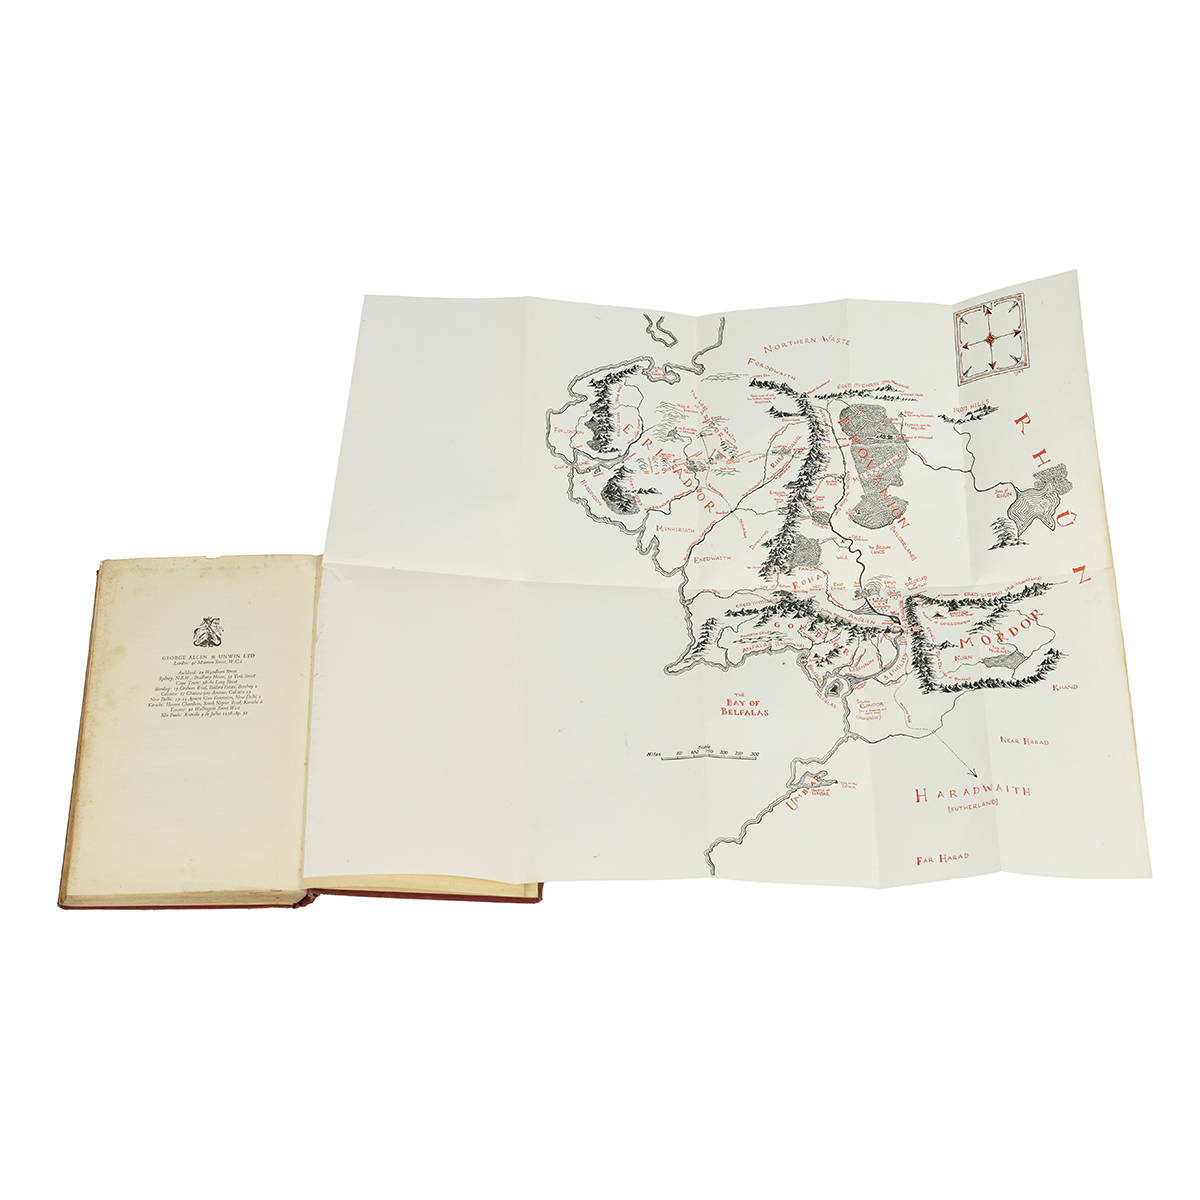 J.R.R.Tolkien Lord of the Rings Trilogy - First Editions comprising Fellowship of the Ring, 1st E... - Image 7 of 7